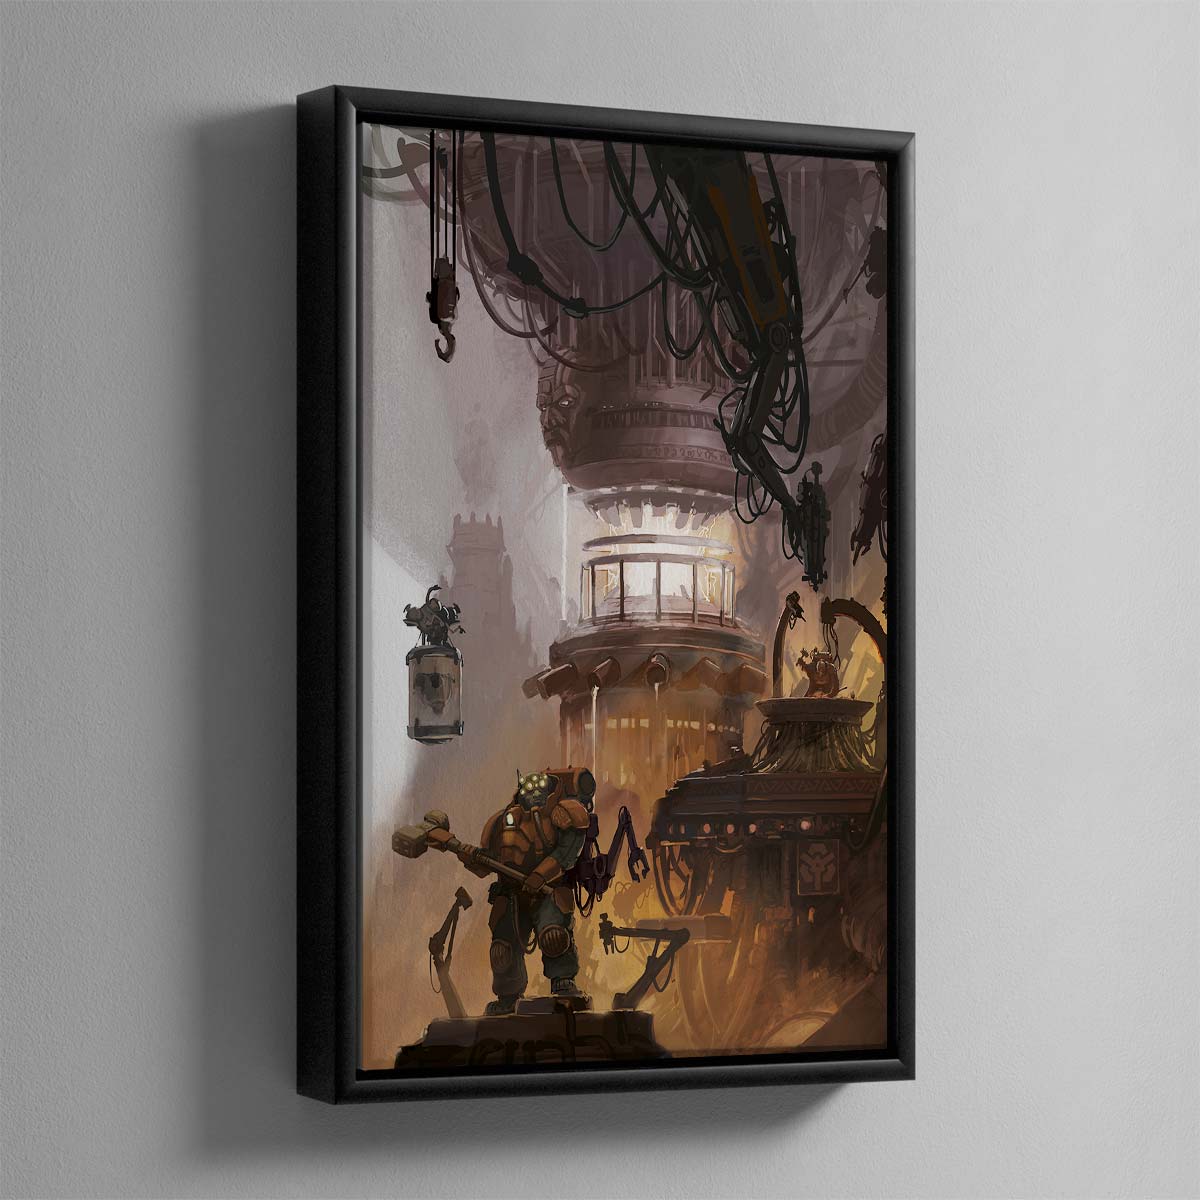 Leagues of Votann Relics Forge – Framed Canvas